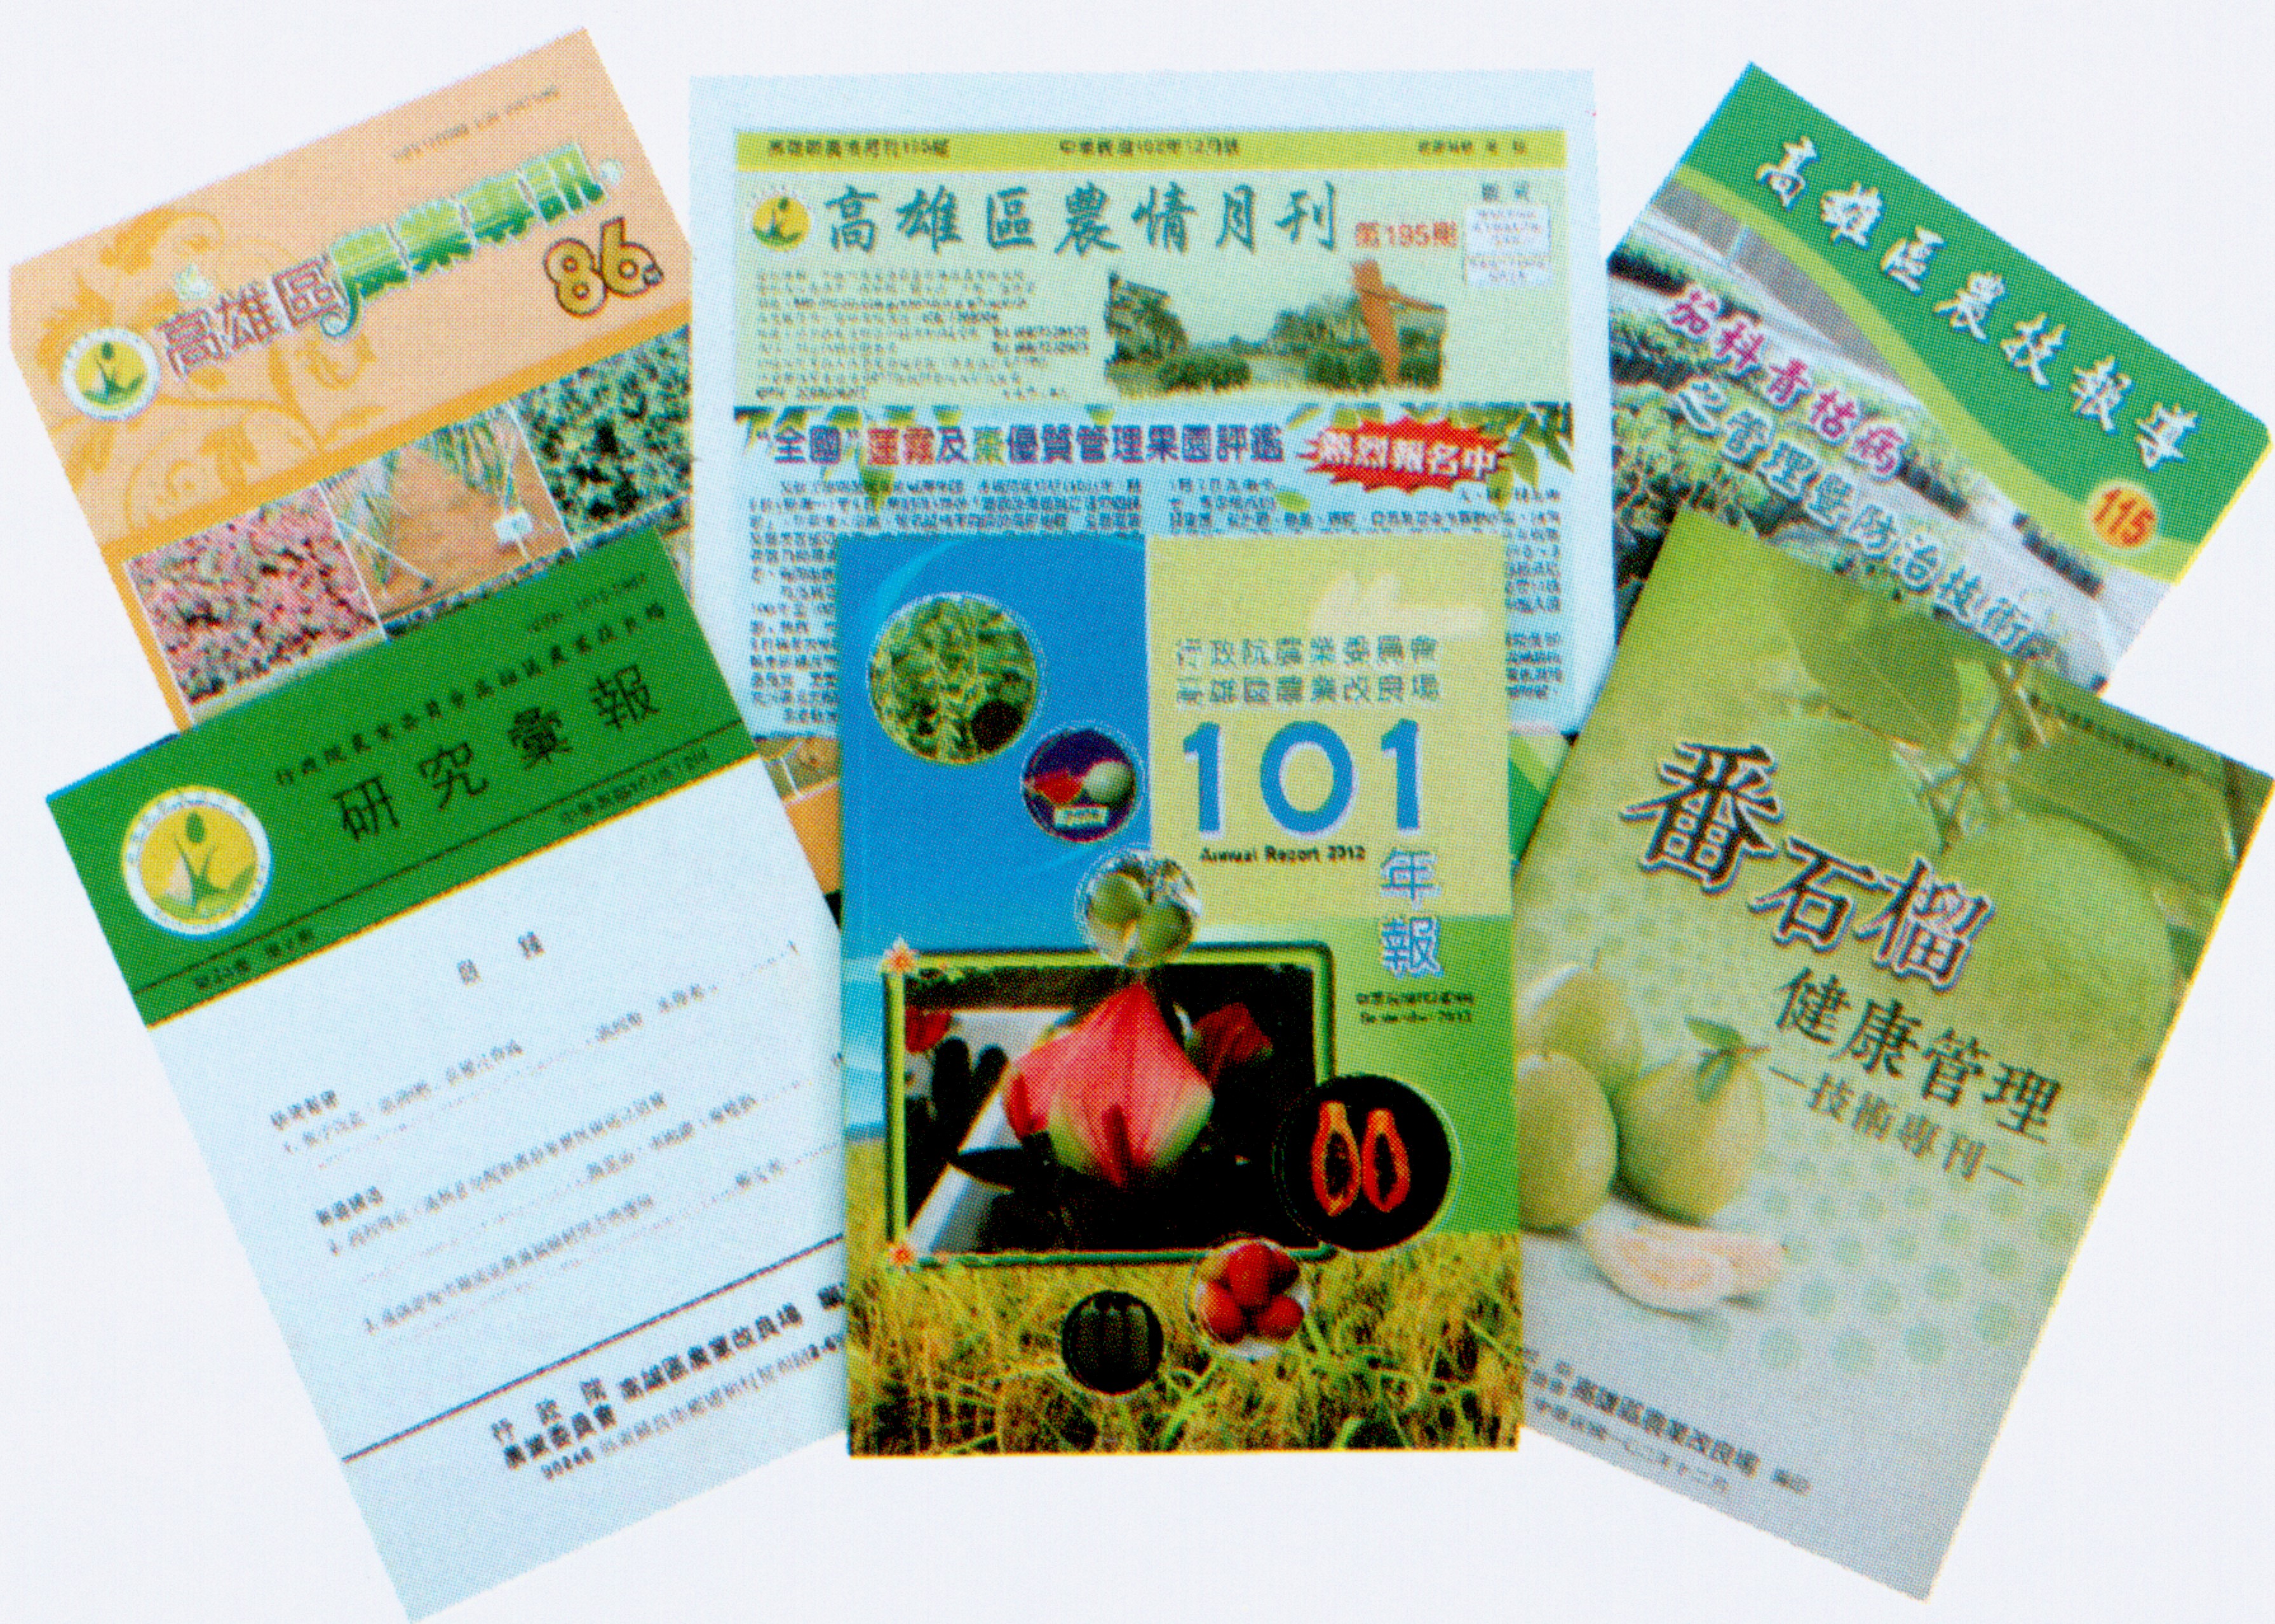 Agricultural journals and technical reports published by our Station